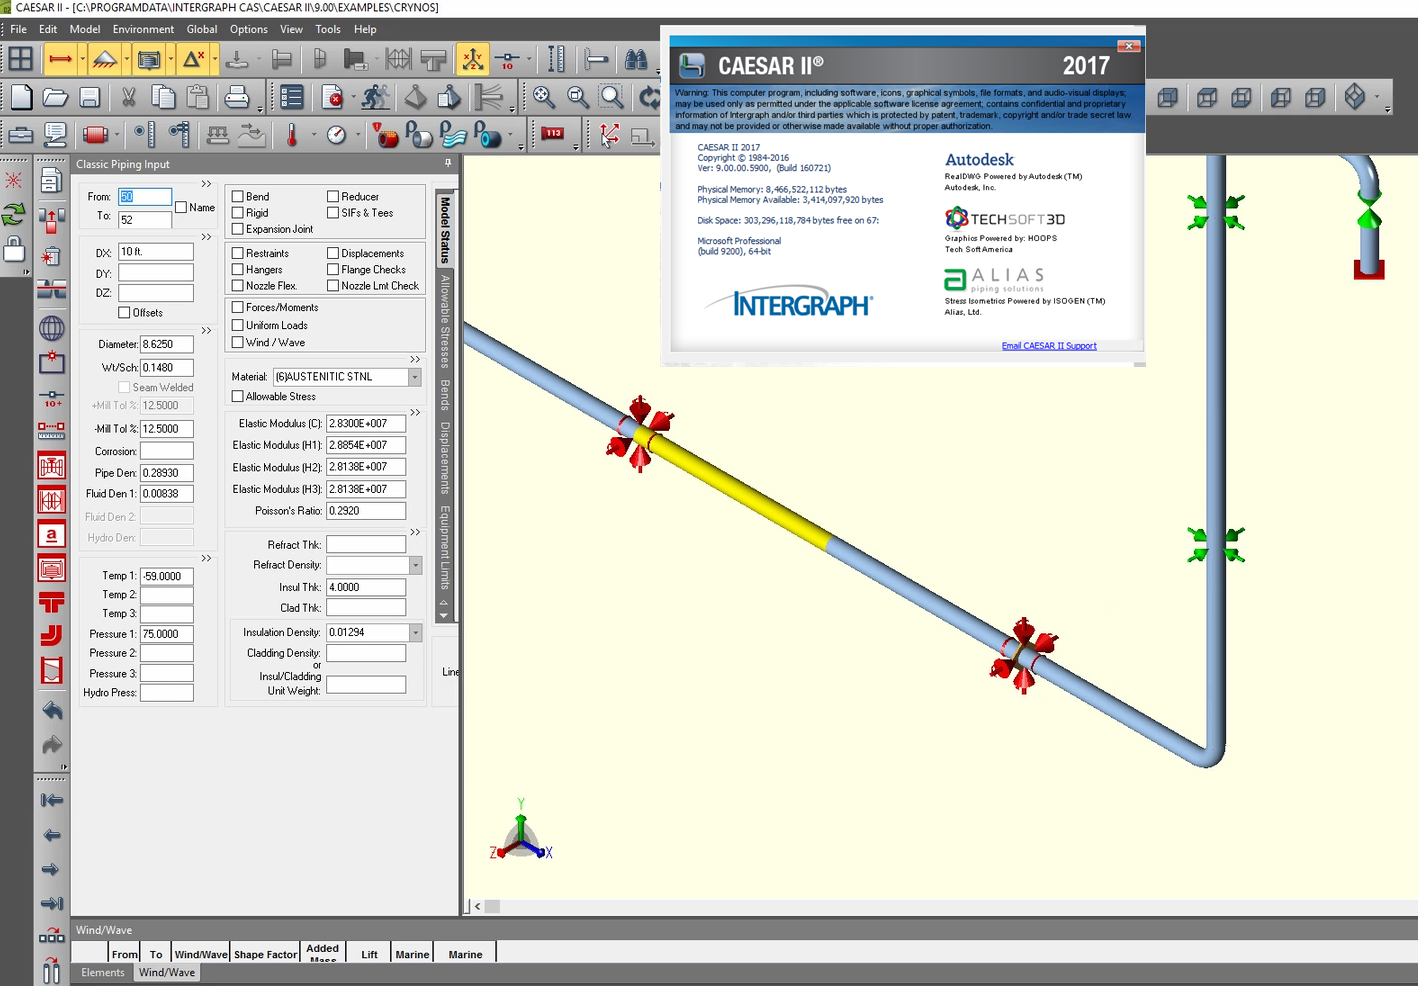 Working with Intergraph CAESARII V2017 build 9.0 with SPLM2012 full